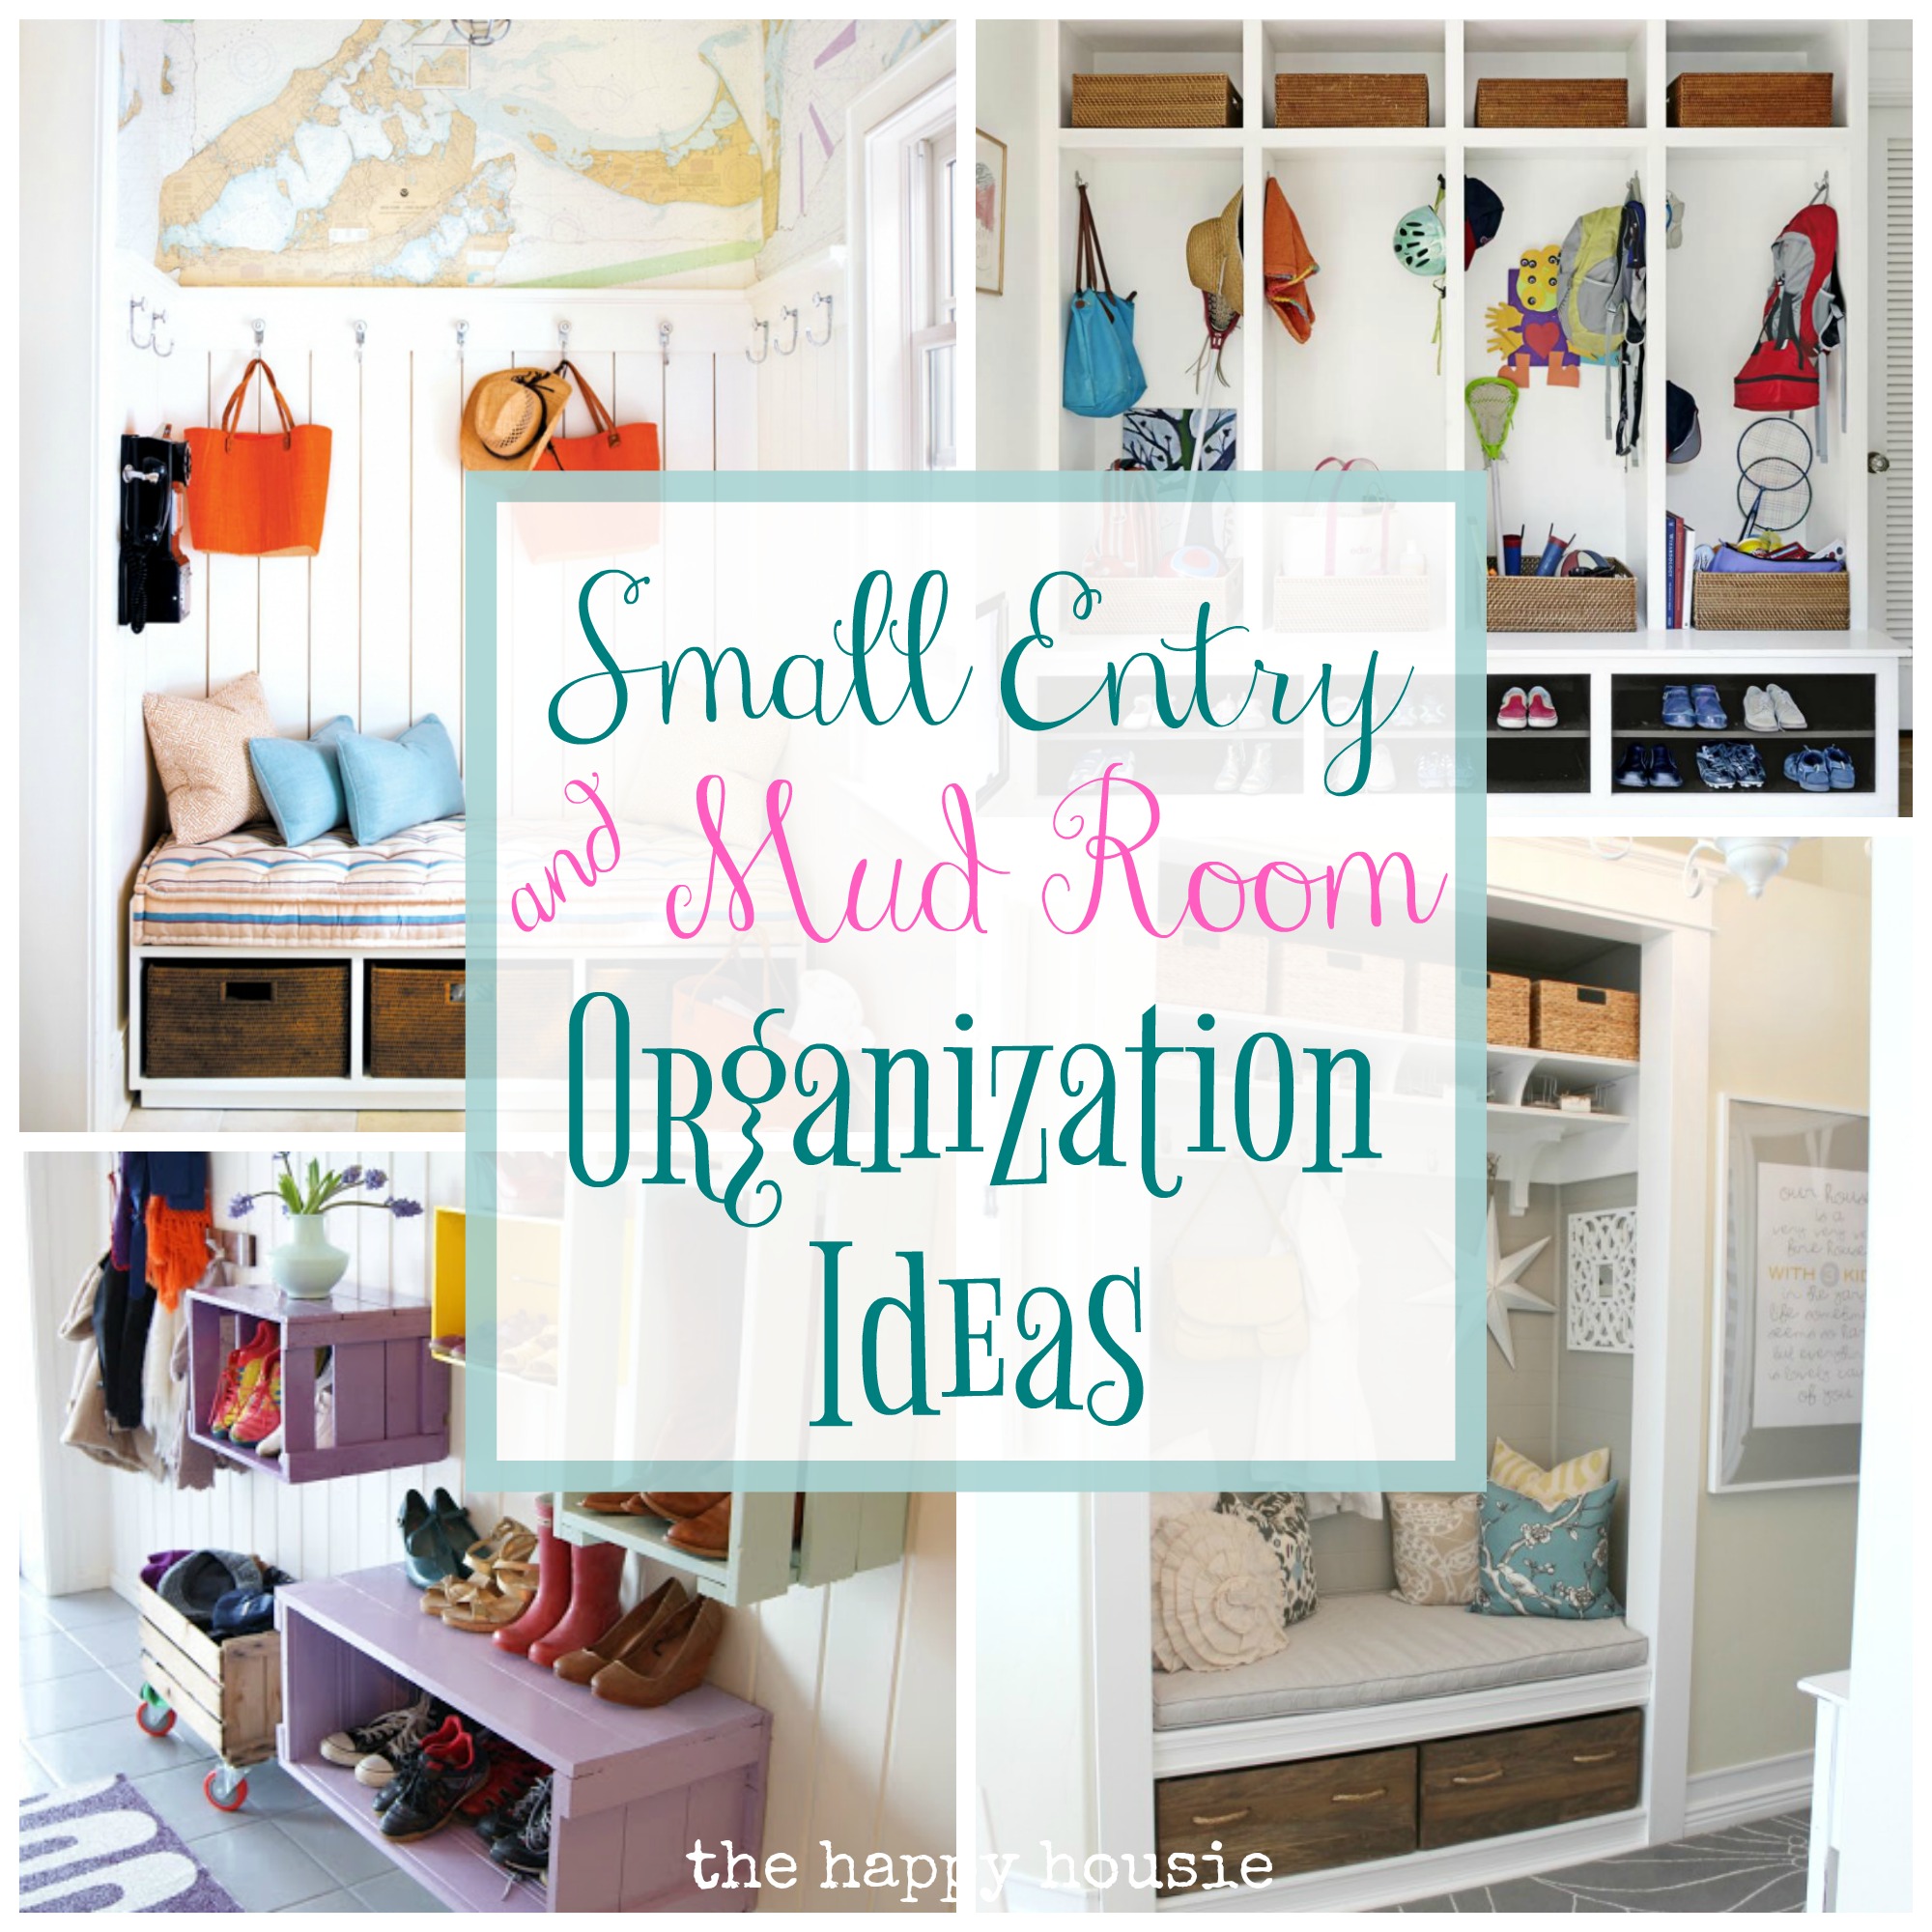 https://www.thehappyhousie.com/wp-content/uploads/2017/02/Youll-love-these-small-entry-and-mud-room-organization-ideas-at-the-happy-housie.jpg